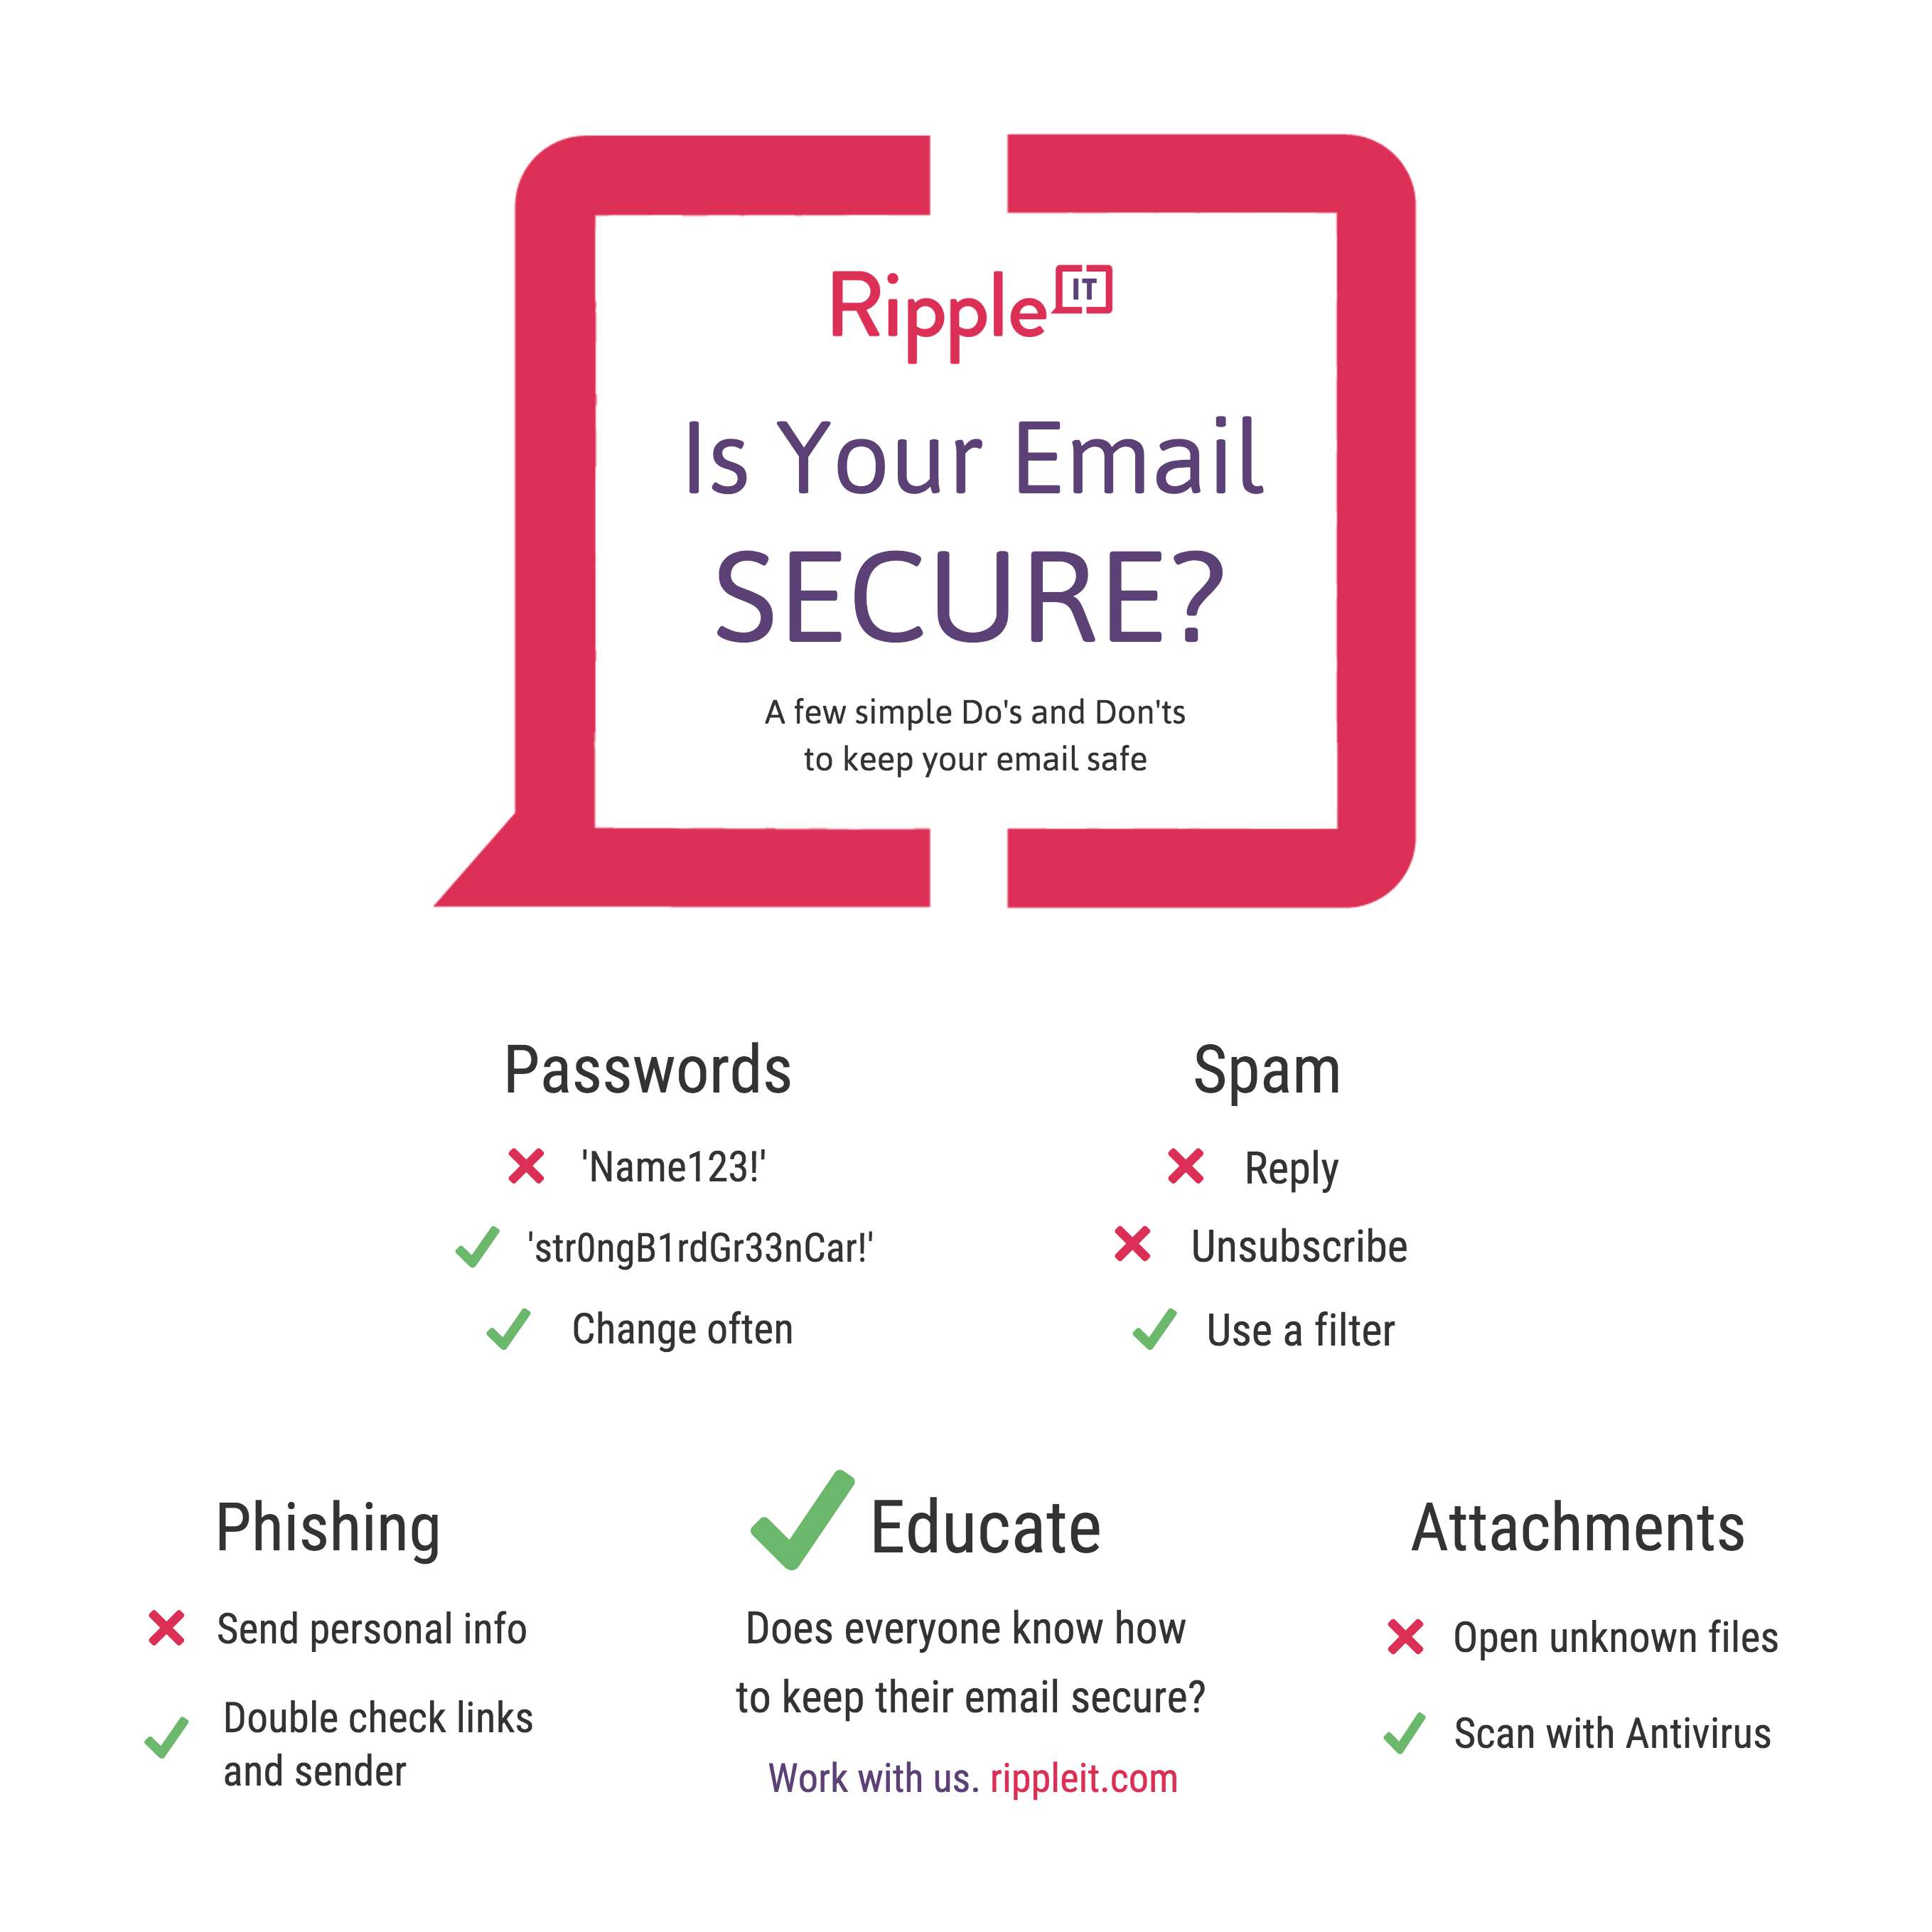 Keep Your Email Secure Best Practices Cheat Sheet